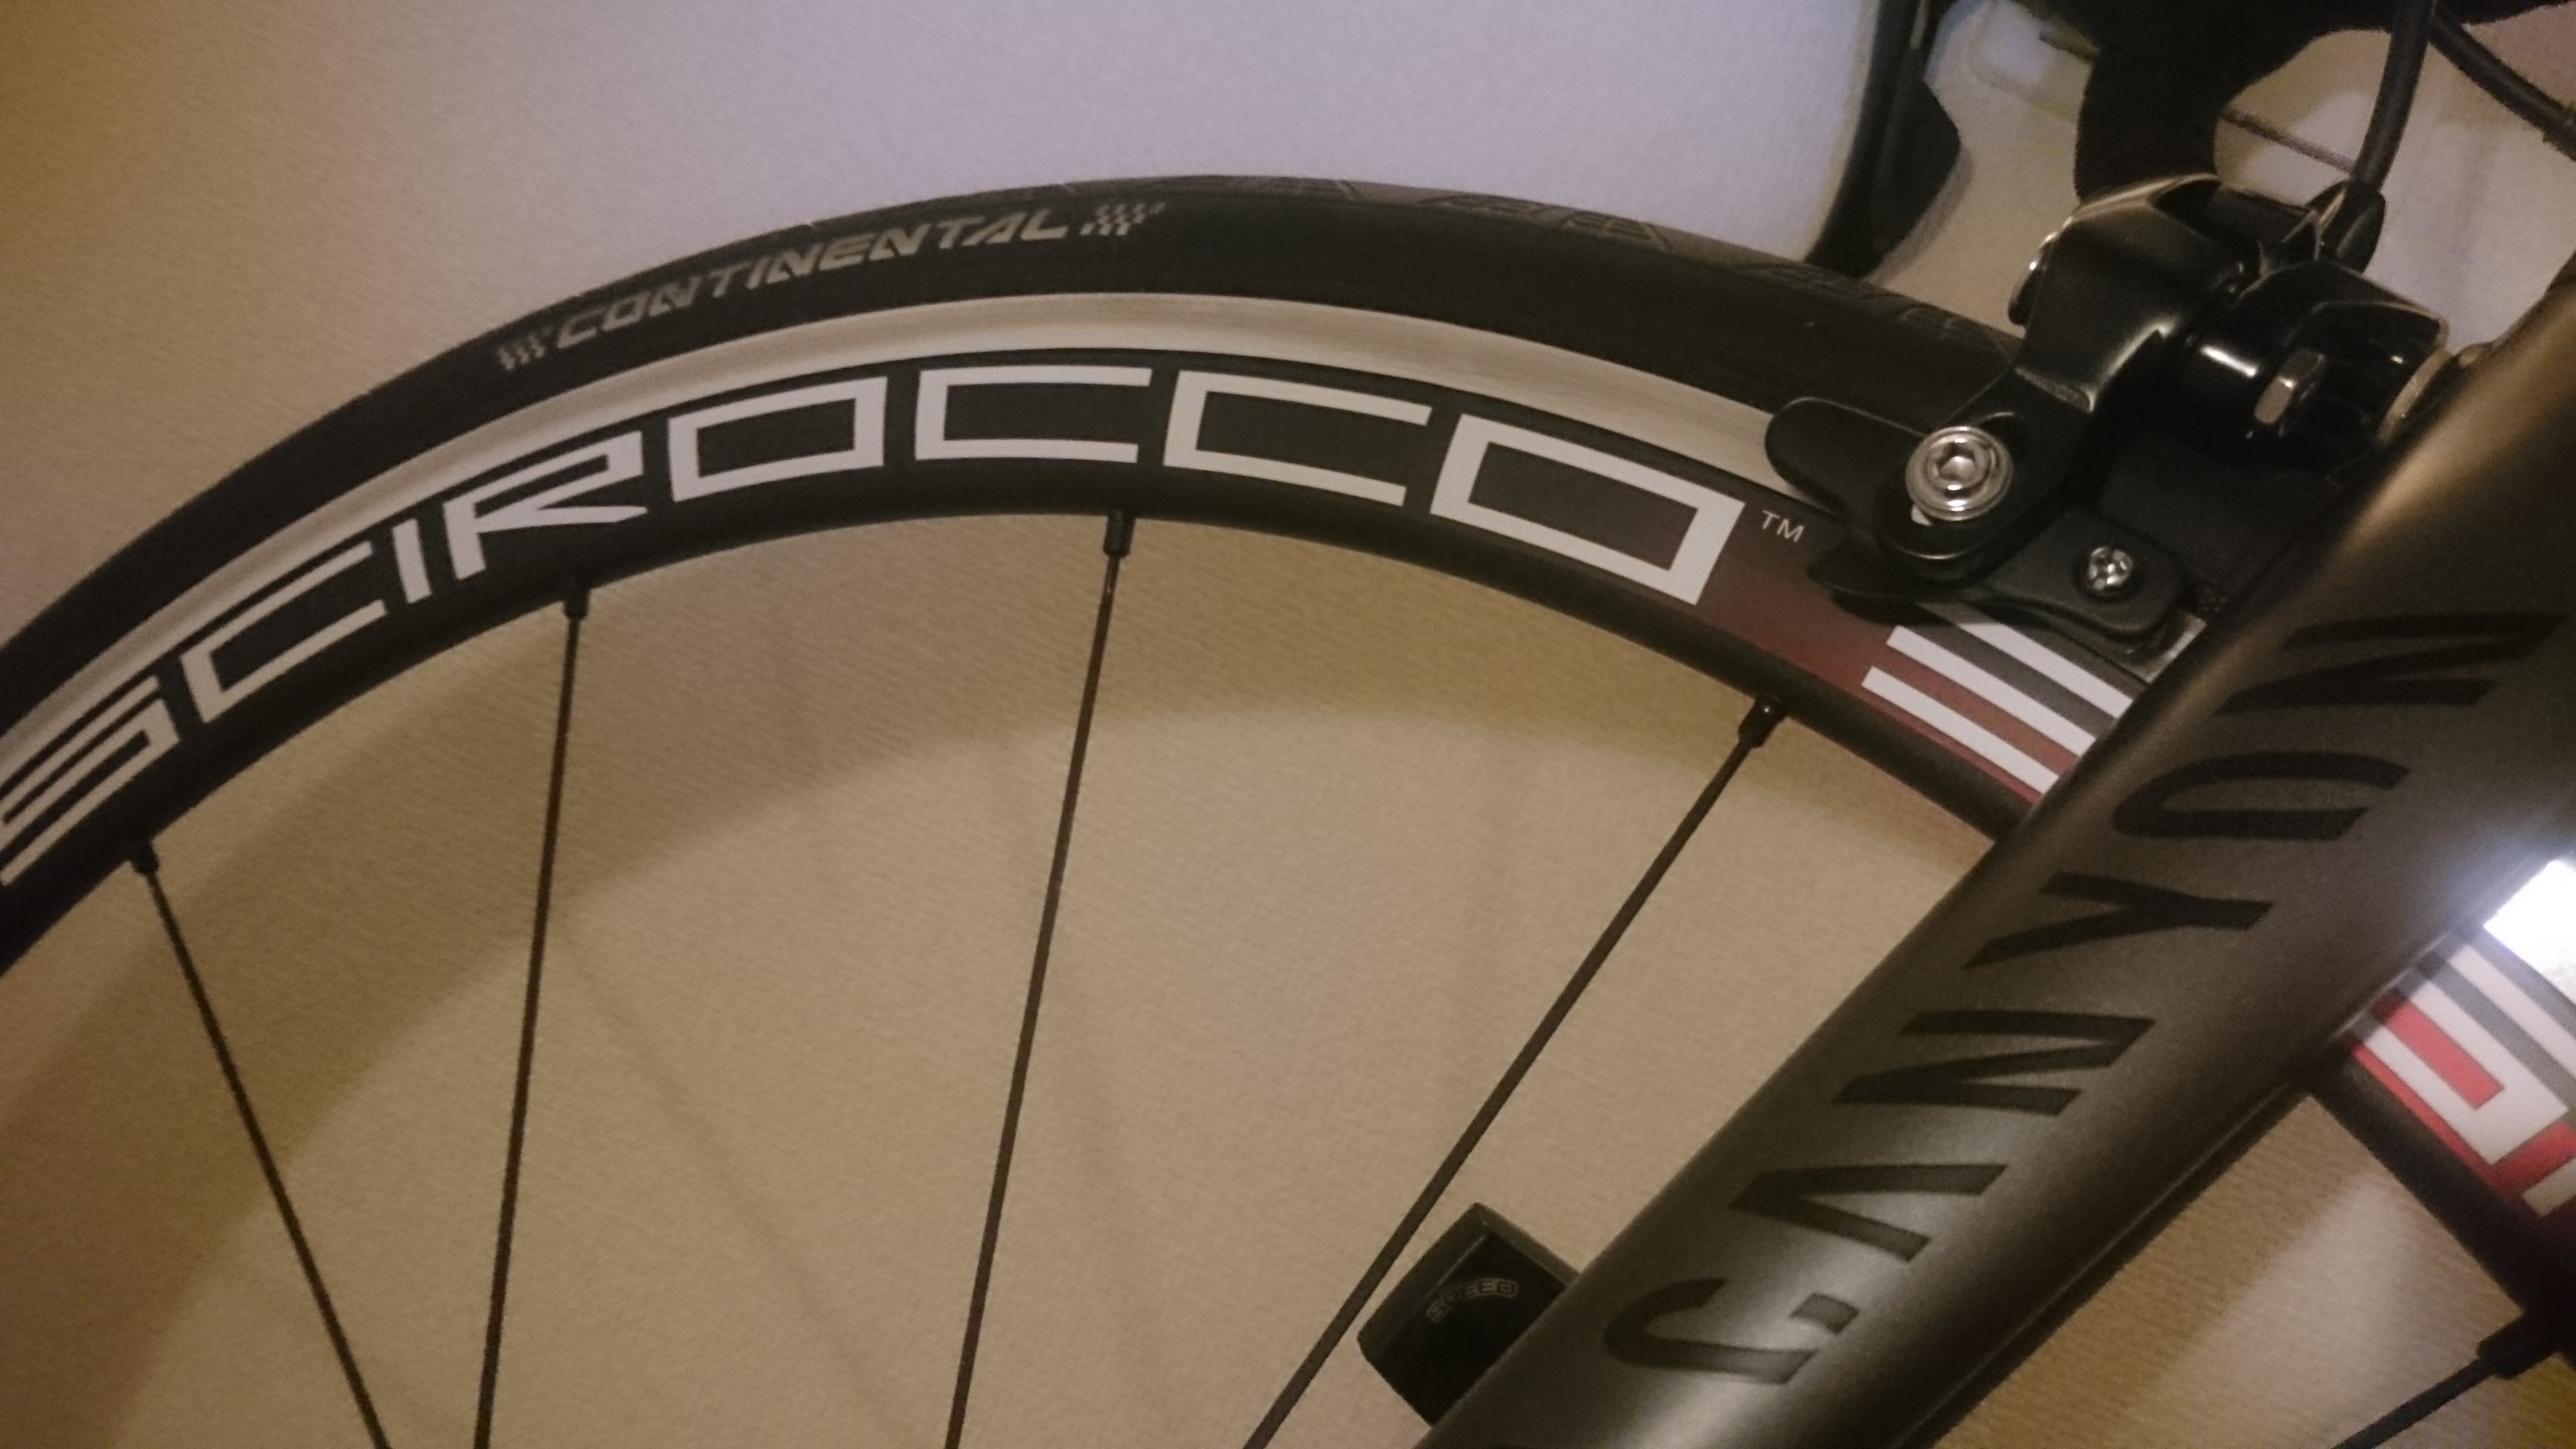 Campagnolo Scirocco、ブレーキングの不具合、その検証結果。